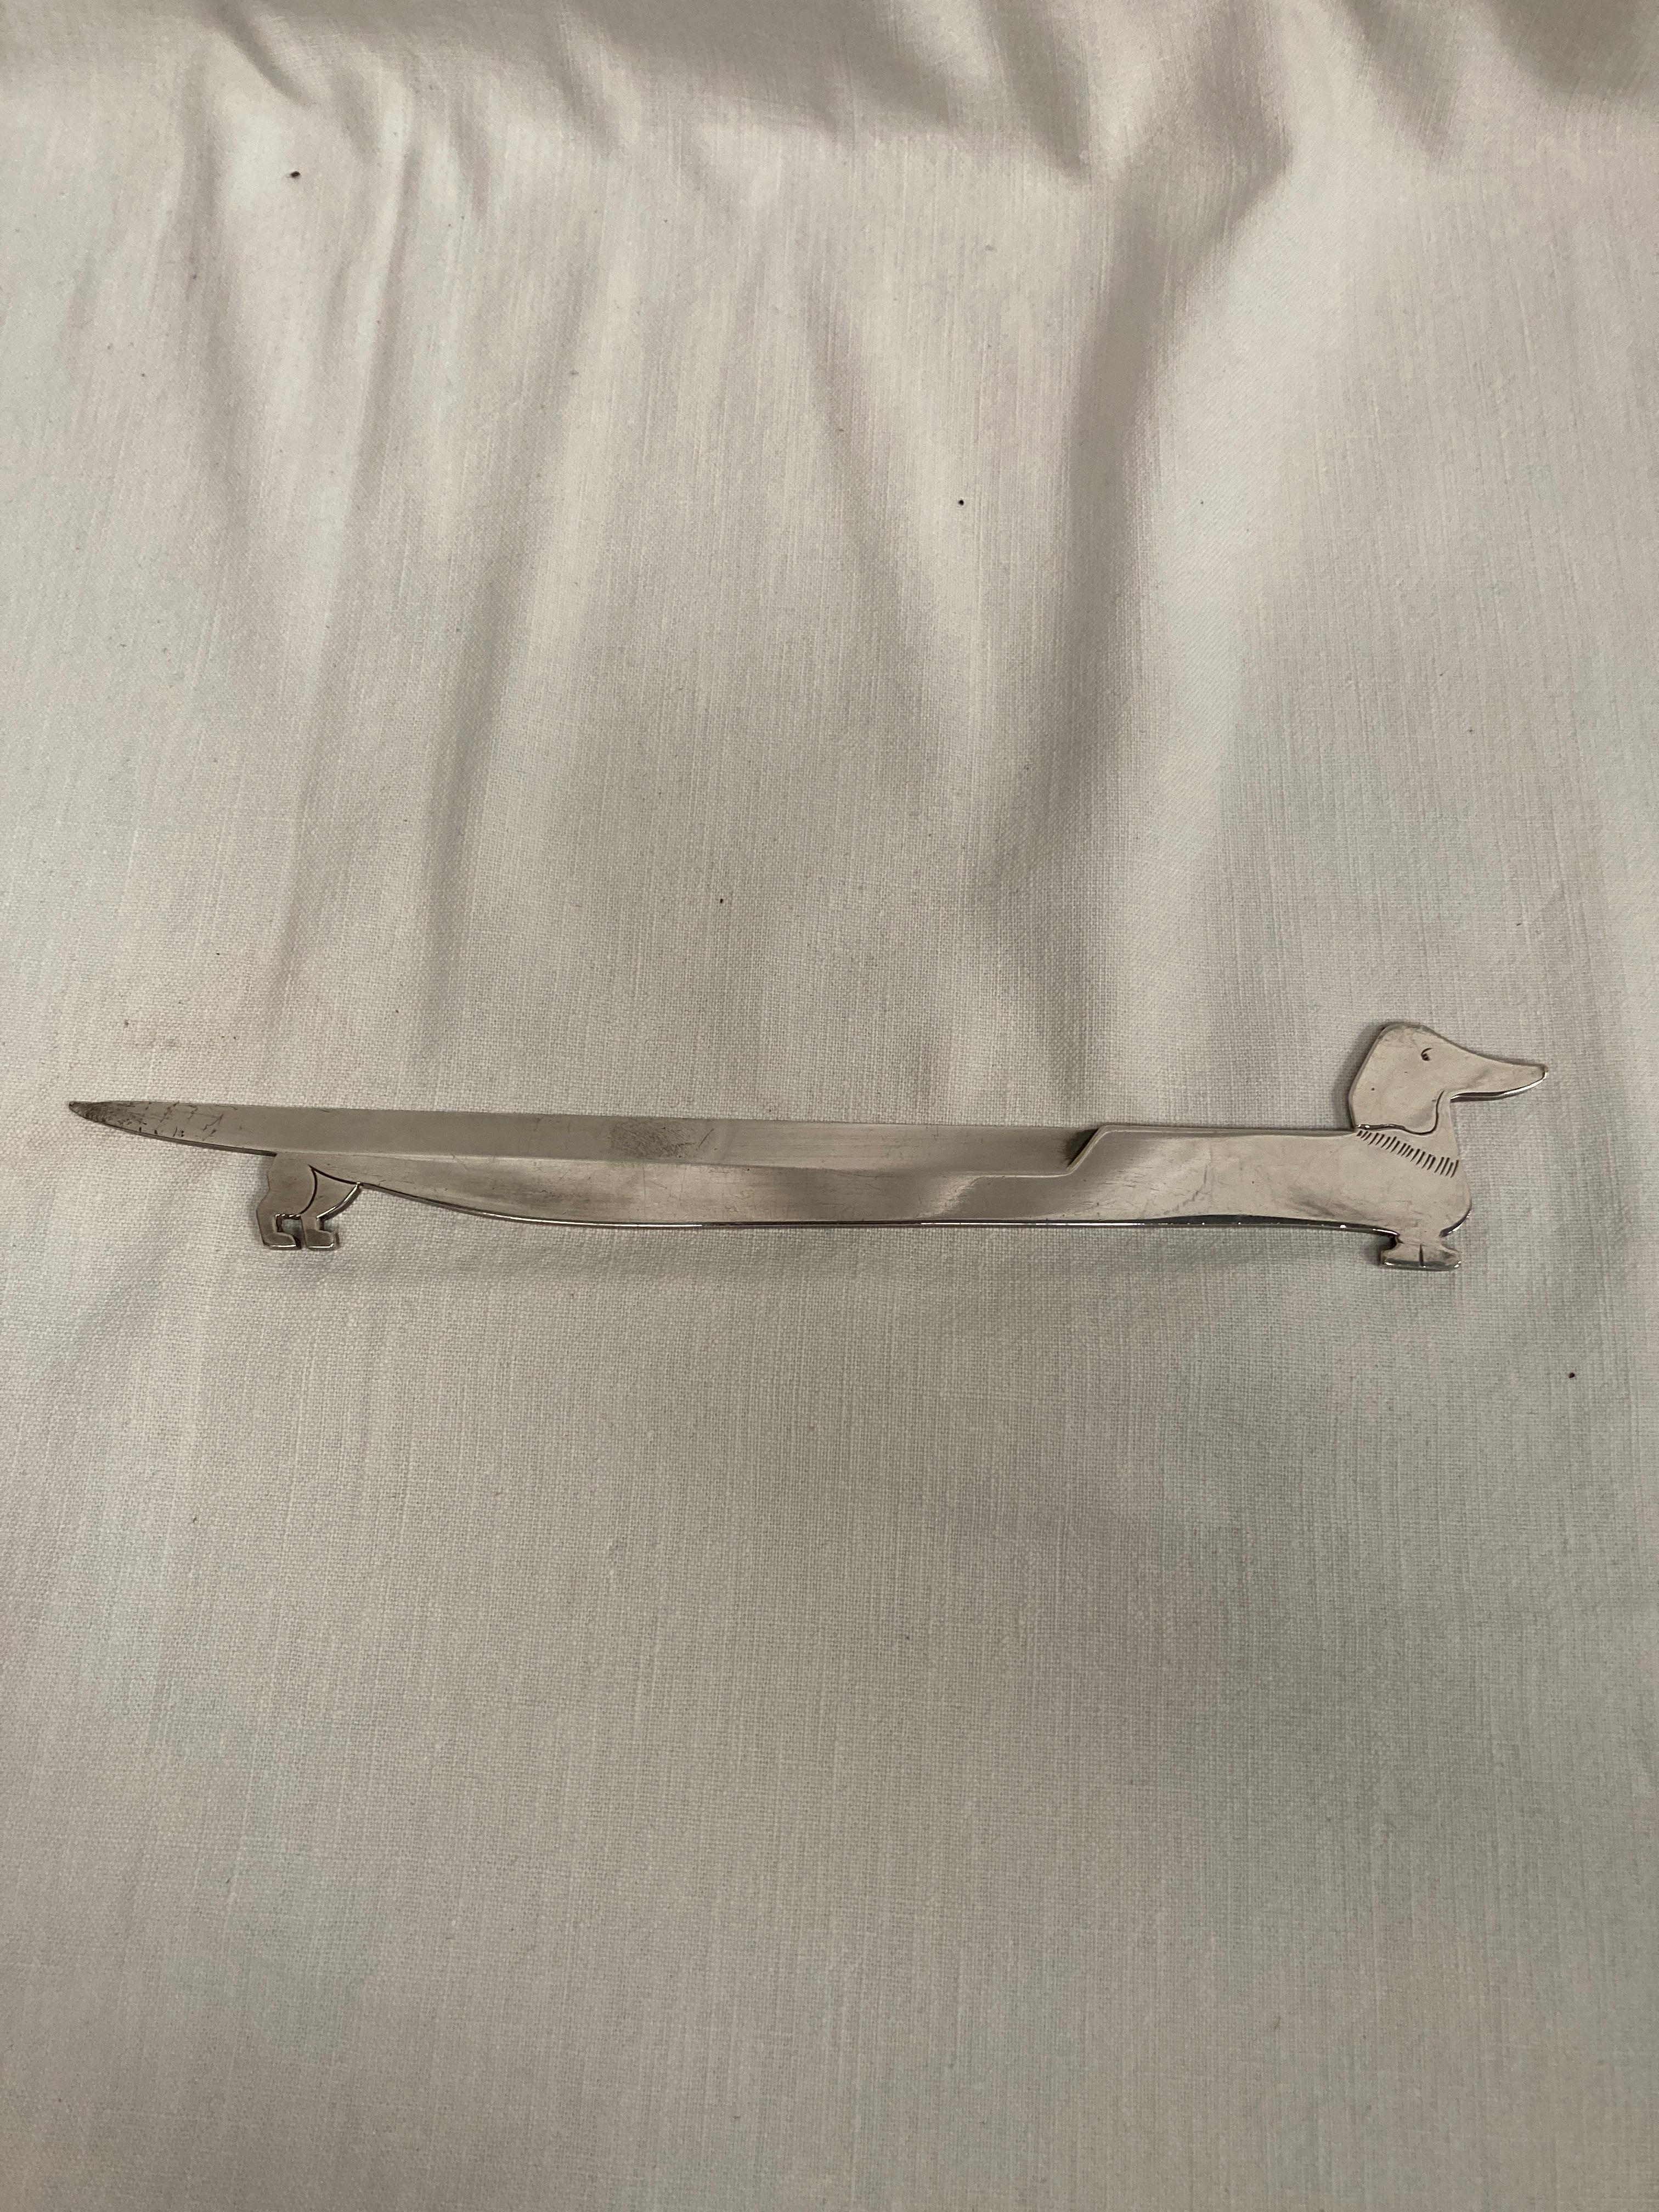 1970's Silver plated letter opener showing a wiener dog
small damages to the tie 
Rare piece